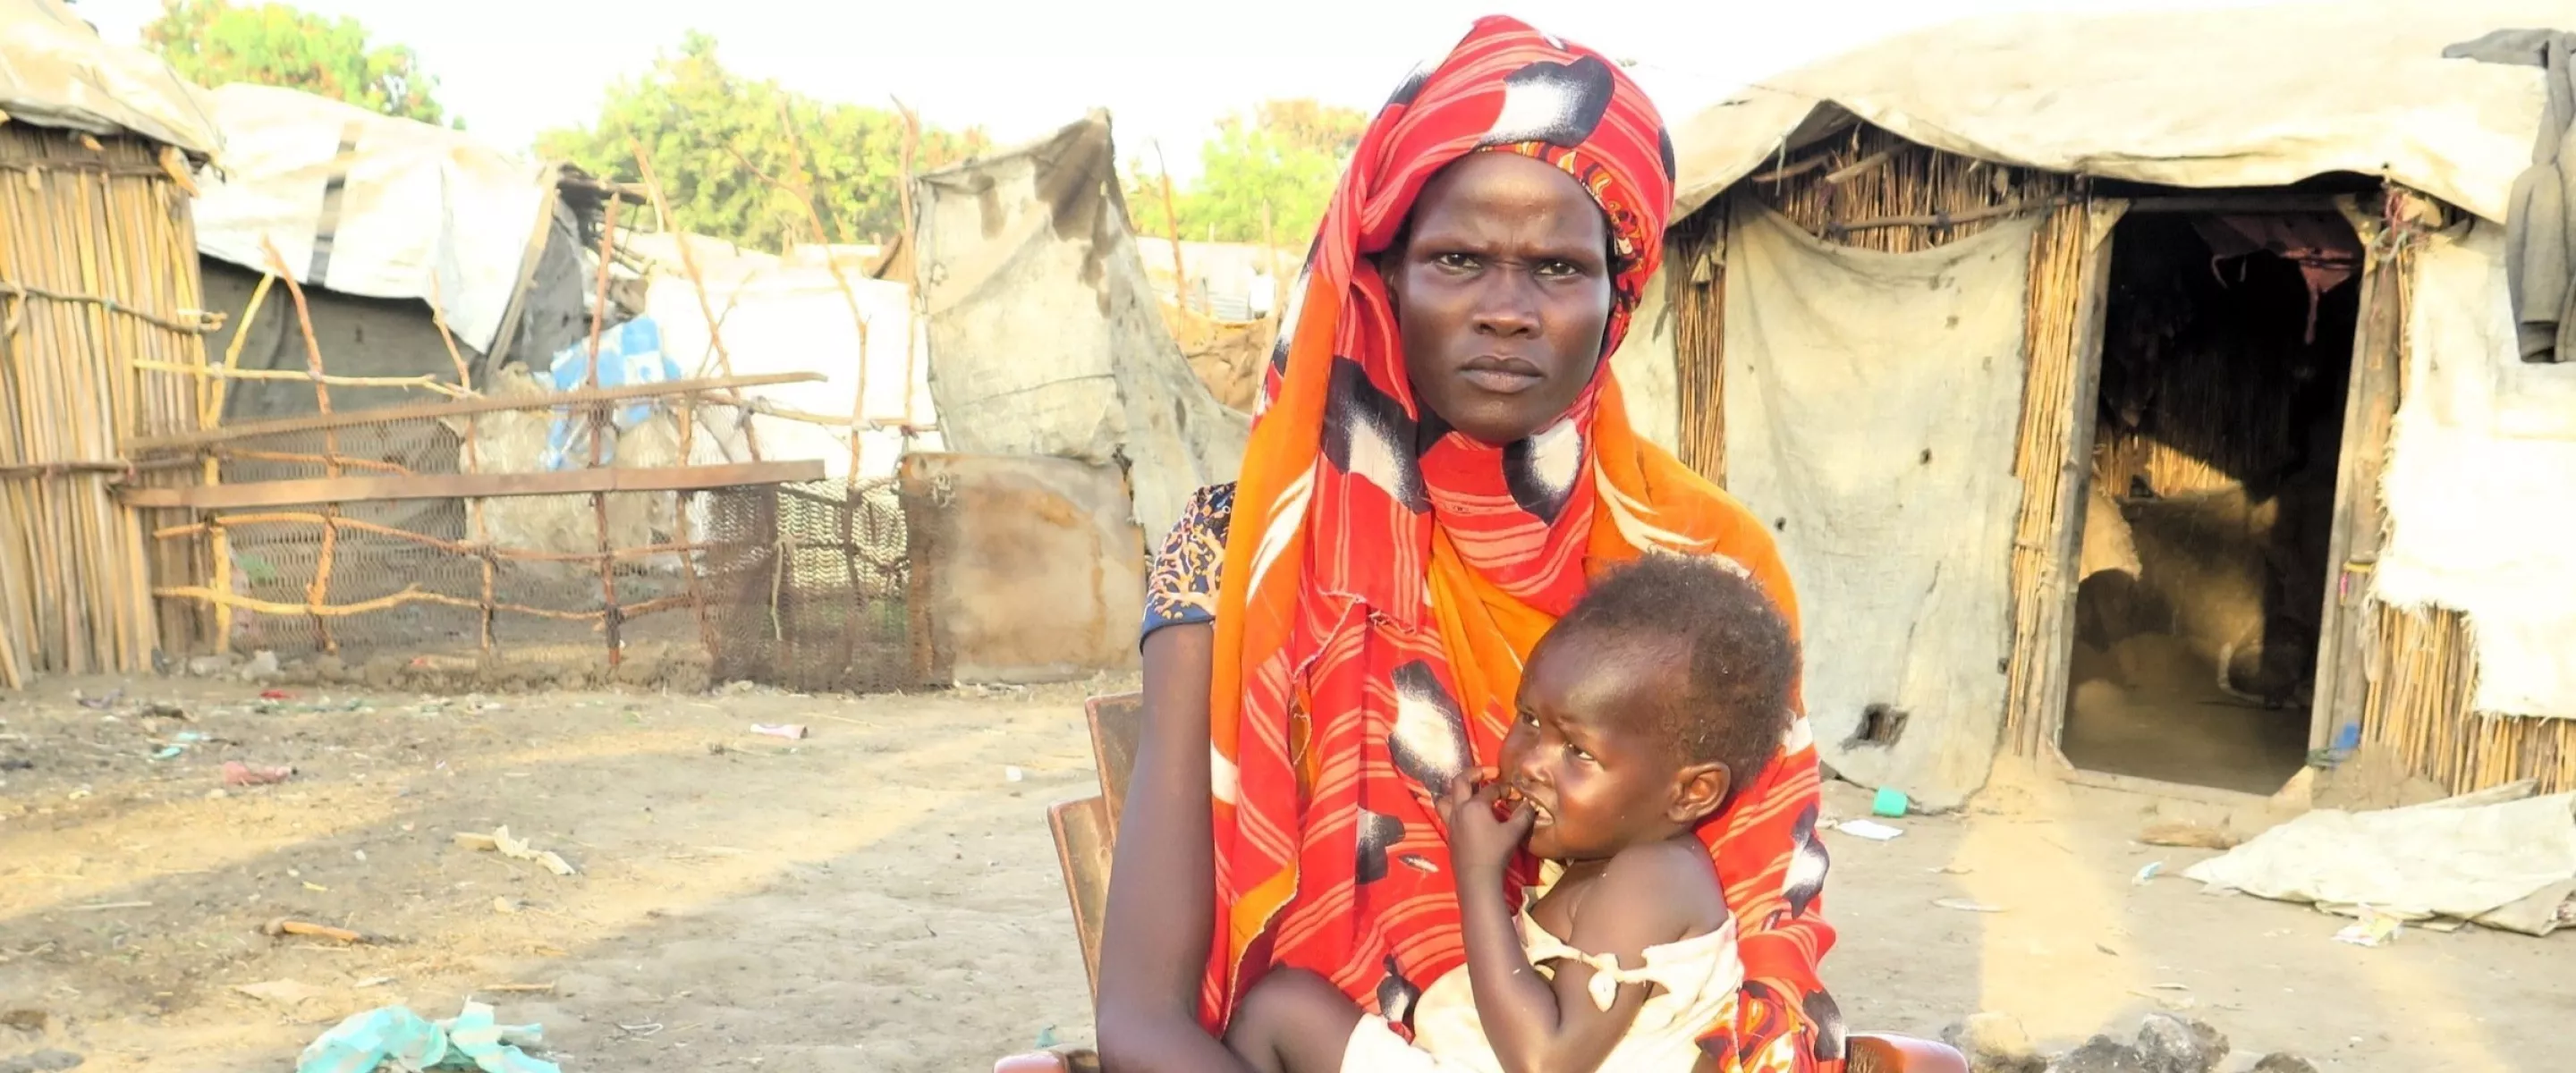 A woman holding a baby in front of a camp for internally displaced people.